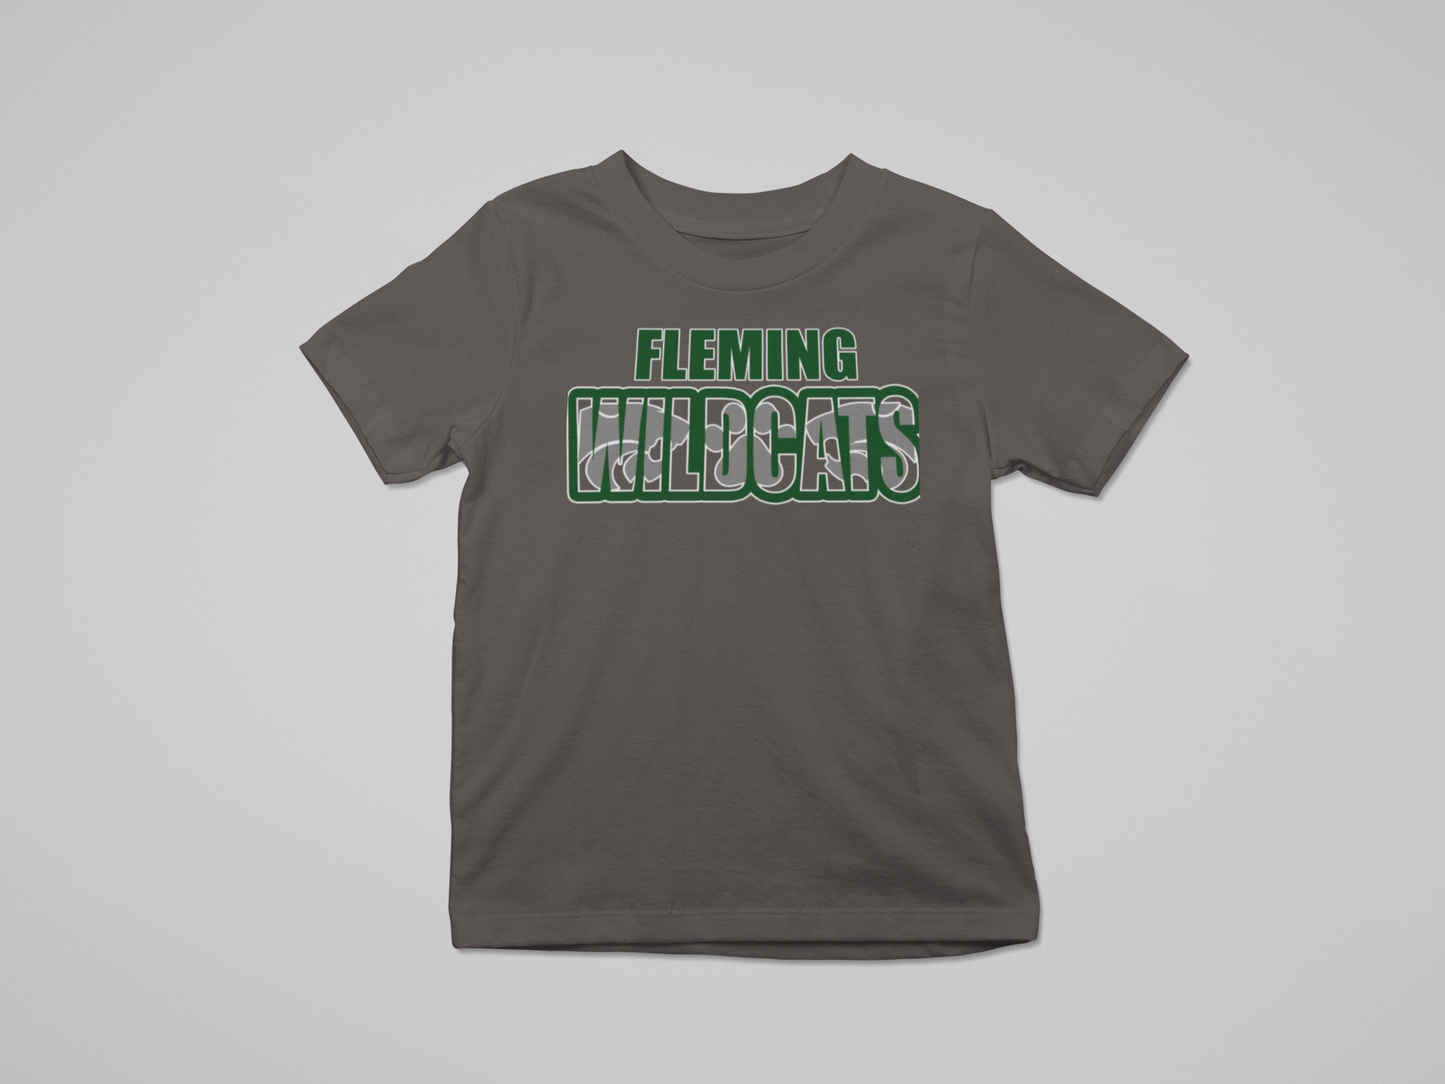 fleming wildcats infant t-shirt: for lil' bison fans only!